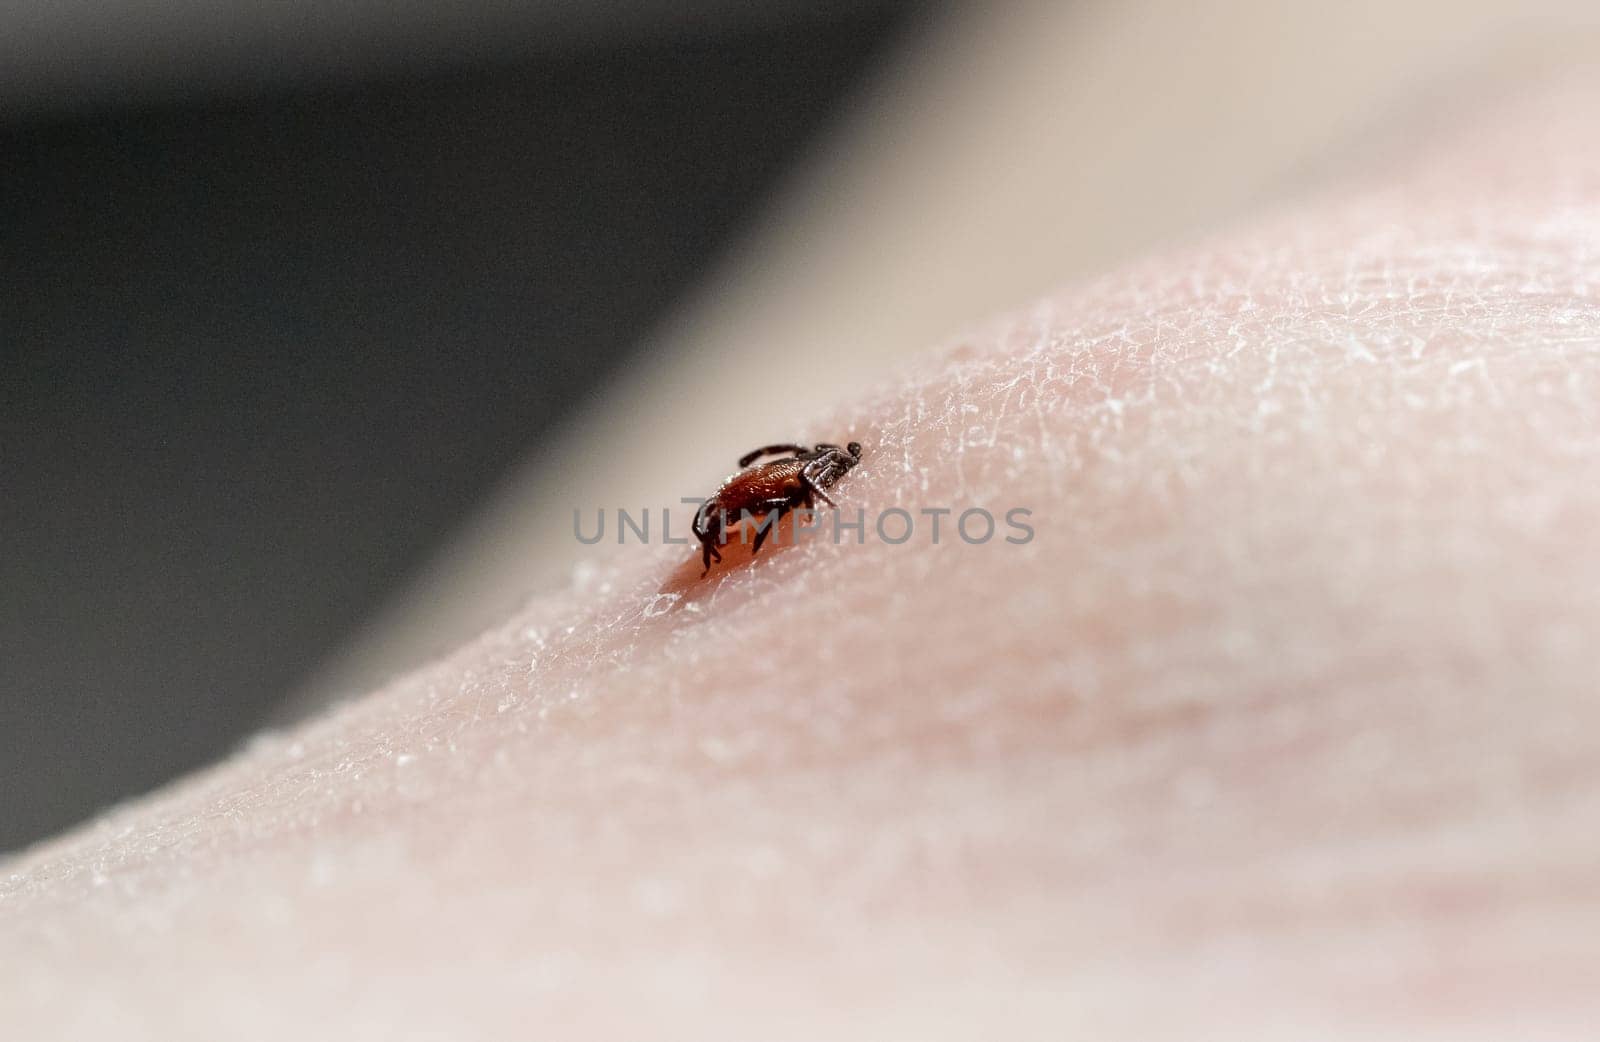 One small tick burrowed into the skin of a Caucasian man on the leg on a summer day, close-up side view.